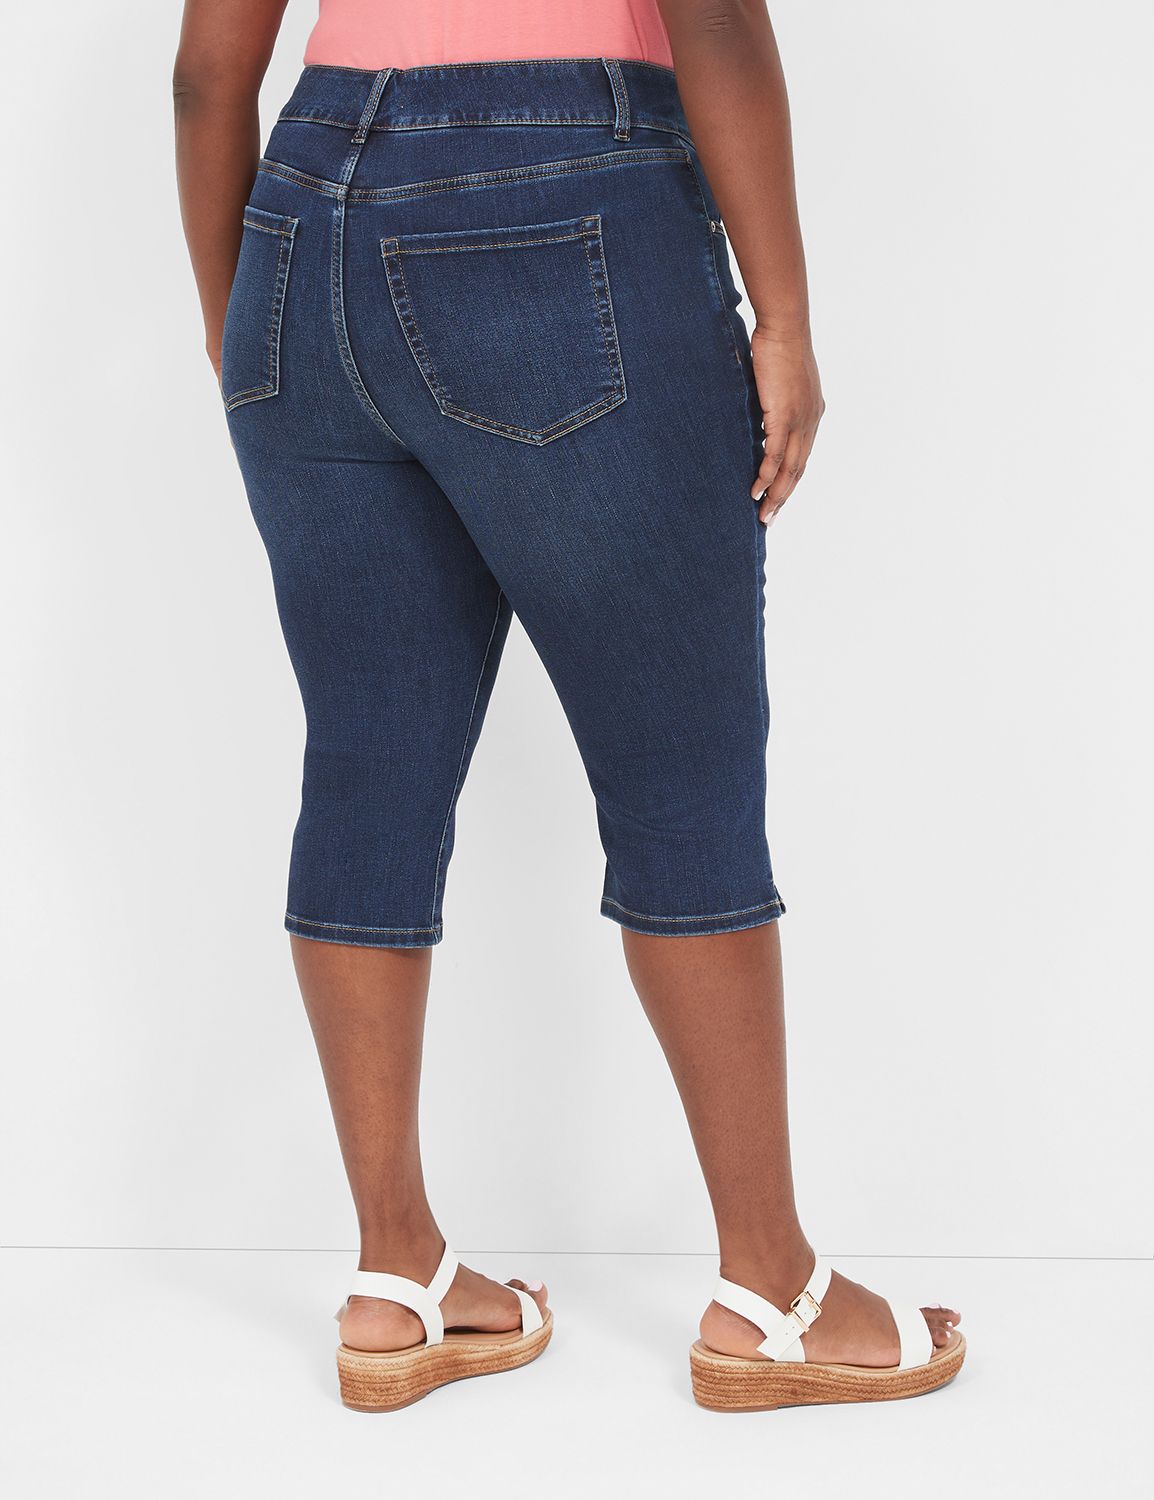  My Fit Jeans- SIZE 2-12 DARK WASH: Women's Stretch Denim Jeans  with Pockets and the Comfort of Leggings, Petite through Plus Size :  Clothing, Shoes & Jewelry